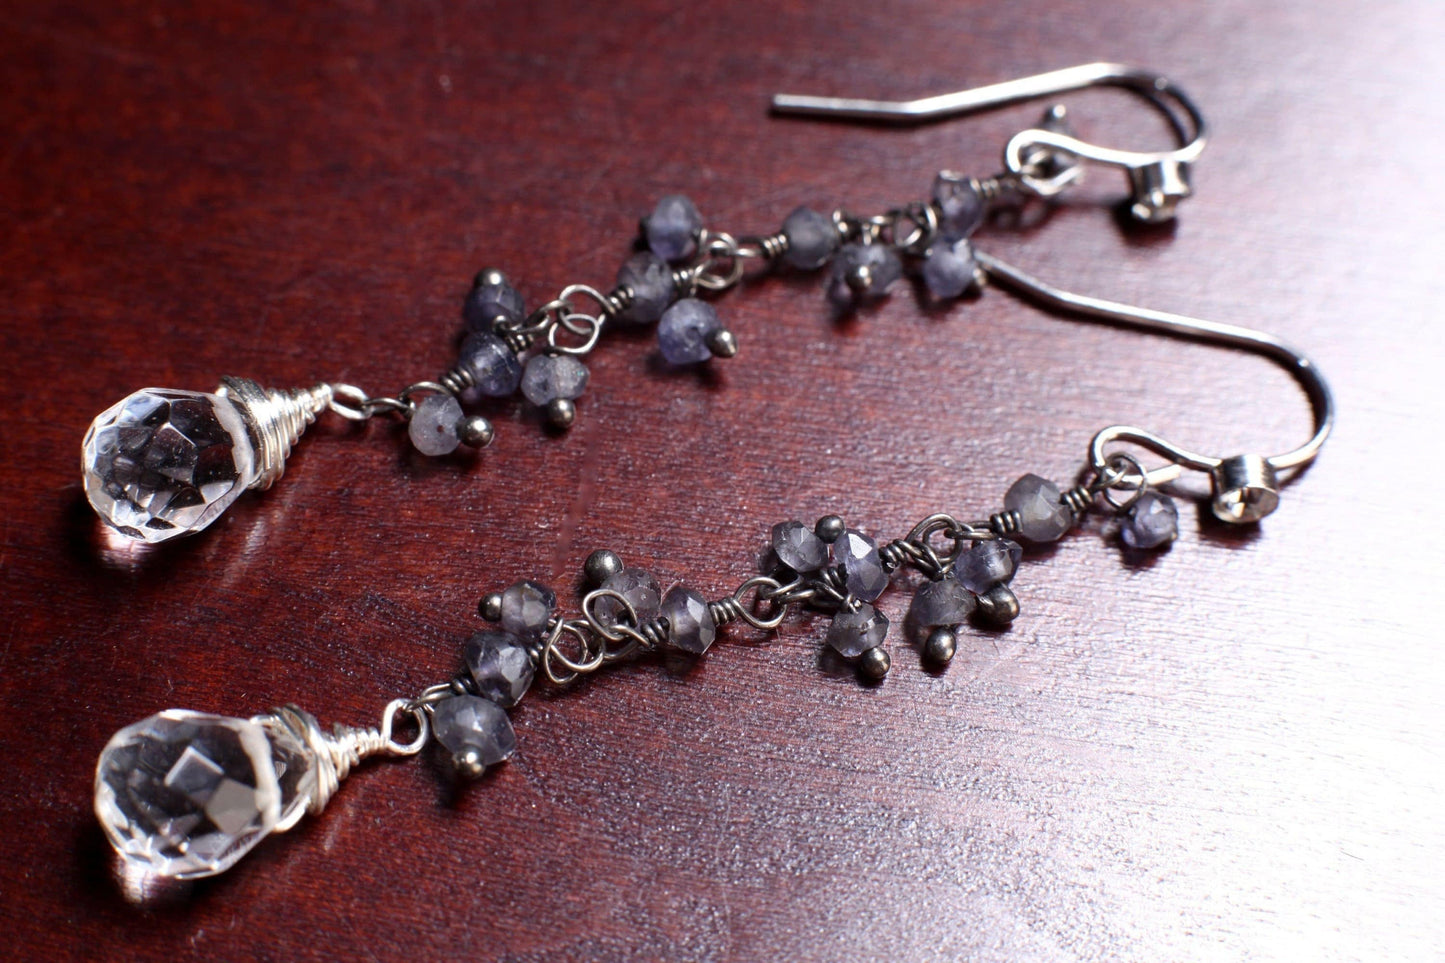 Genuine Iolite Faceted Clusters Oxidized Silver natural Rock Crystal Quartz 7x9mm Drop Wire Wrapped Dangling in CZ Rhodium Earwire Earrings